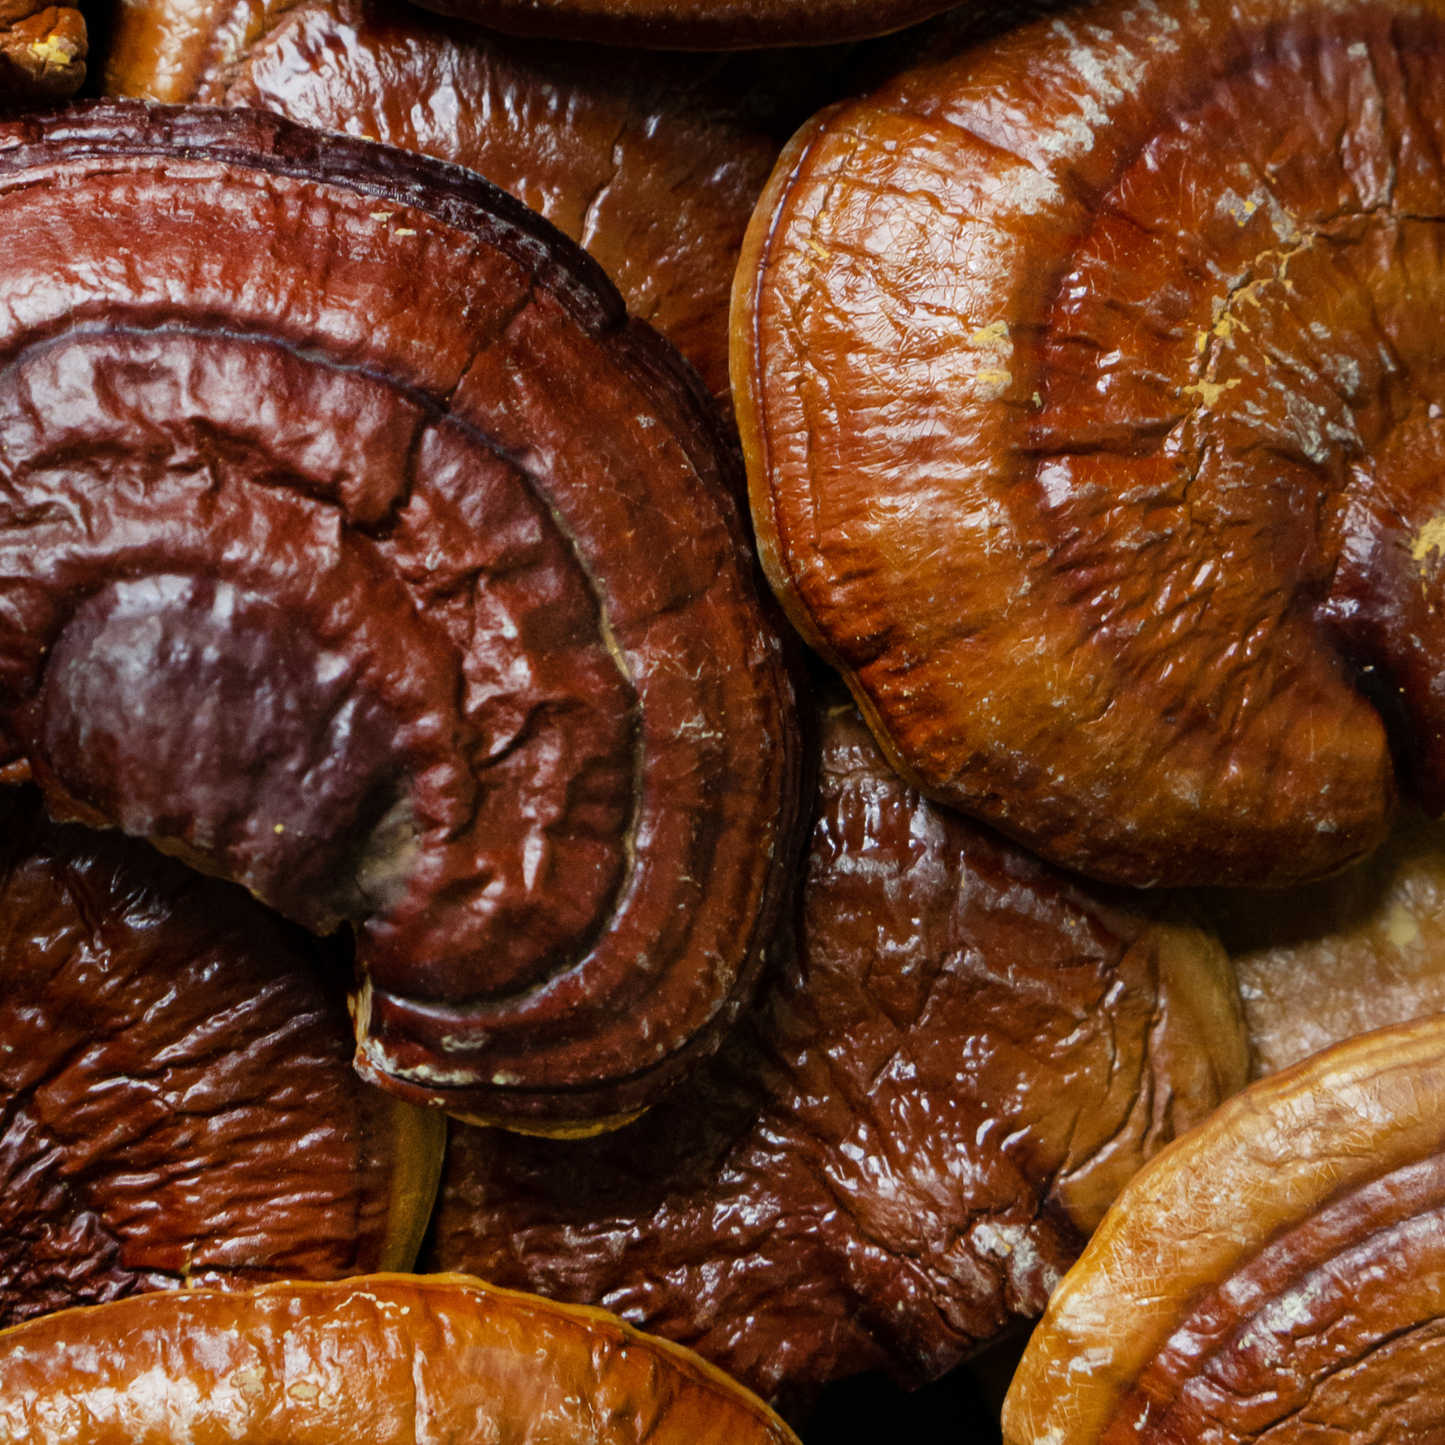 Reishi Mushrooms Large Whole Mushrooms For Apoptogenic Properties, Cooking, Teas and Smoothies